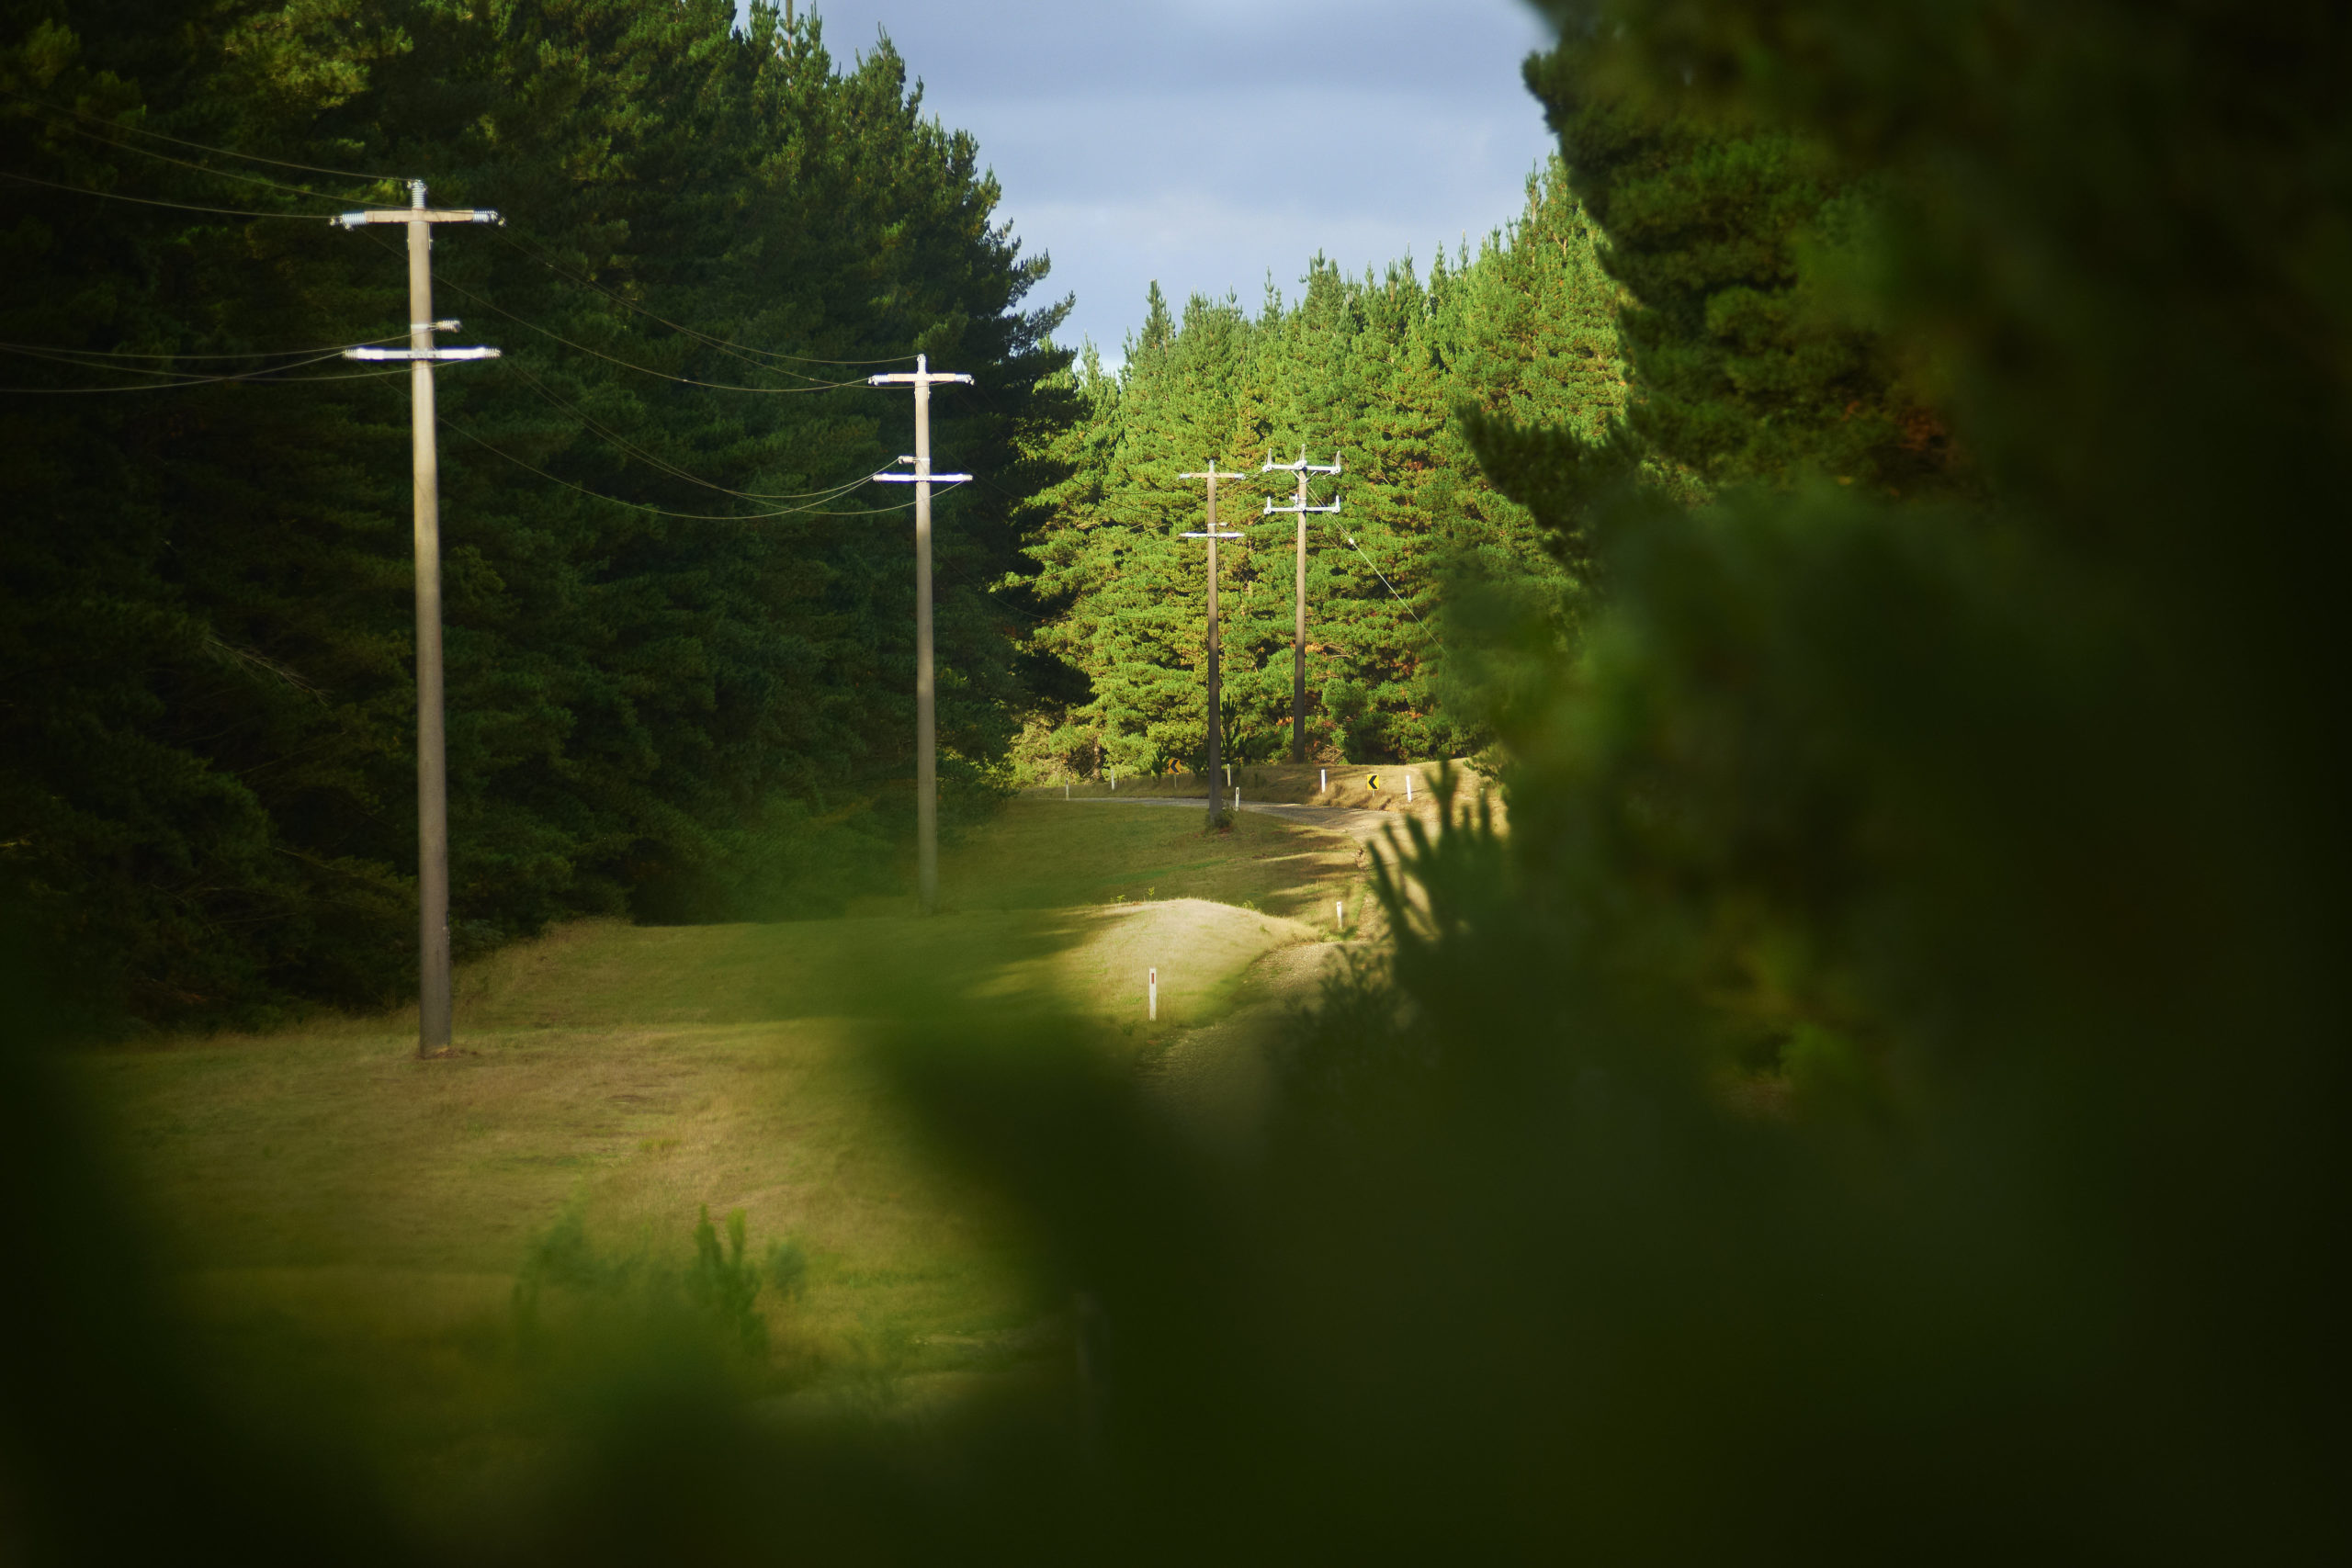 Power lines running through cleared pine forest